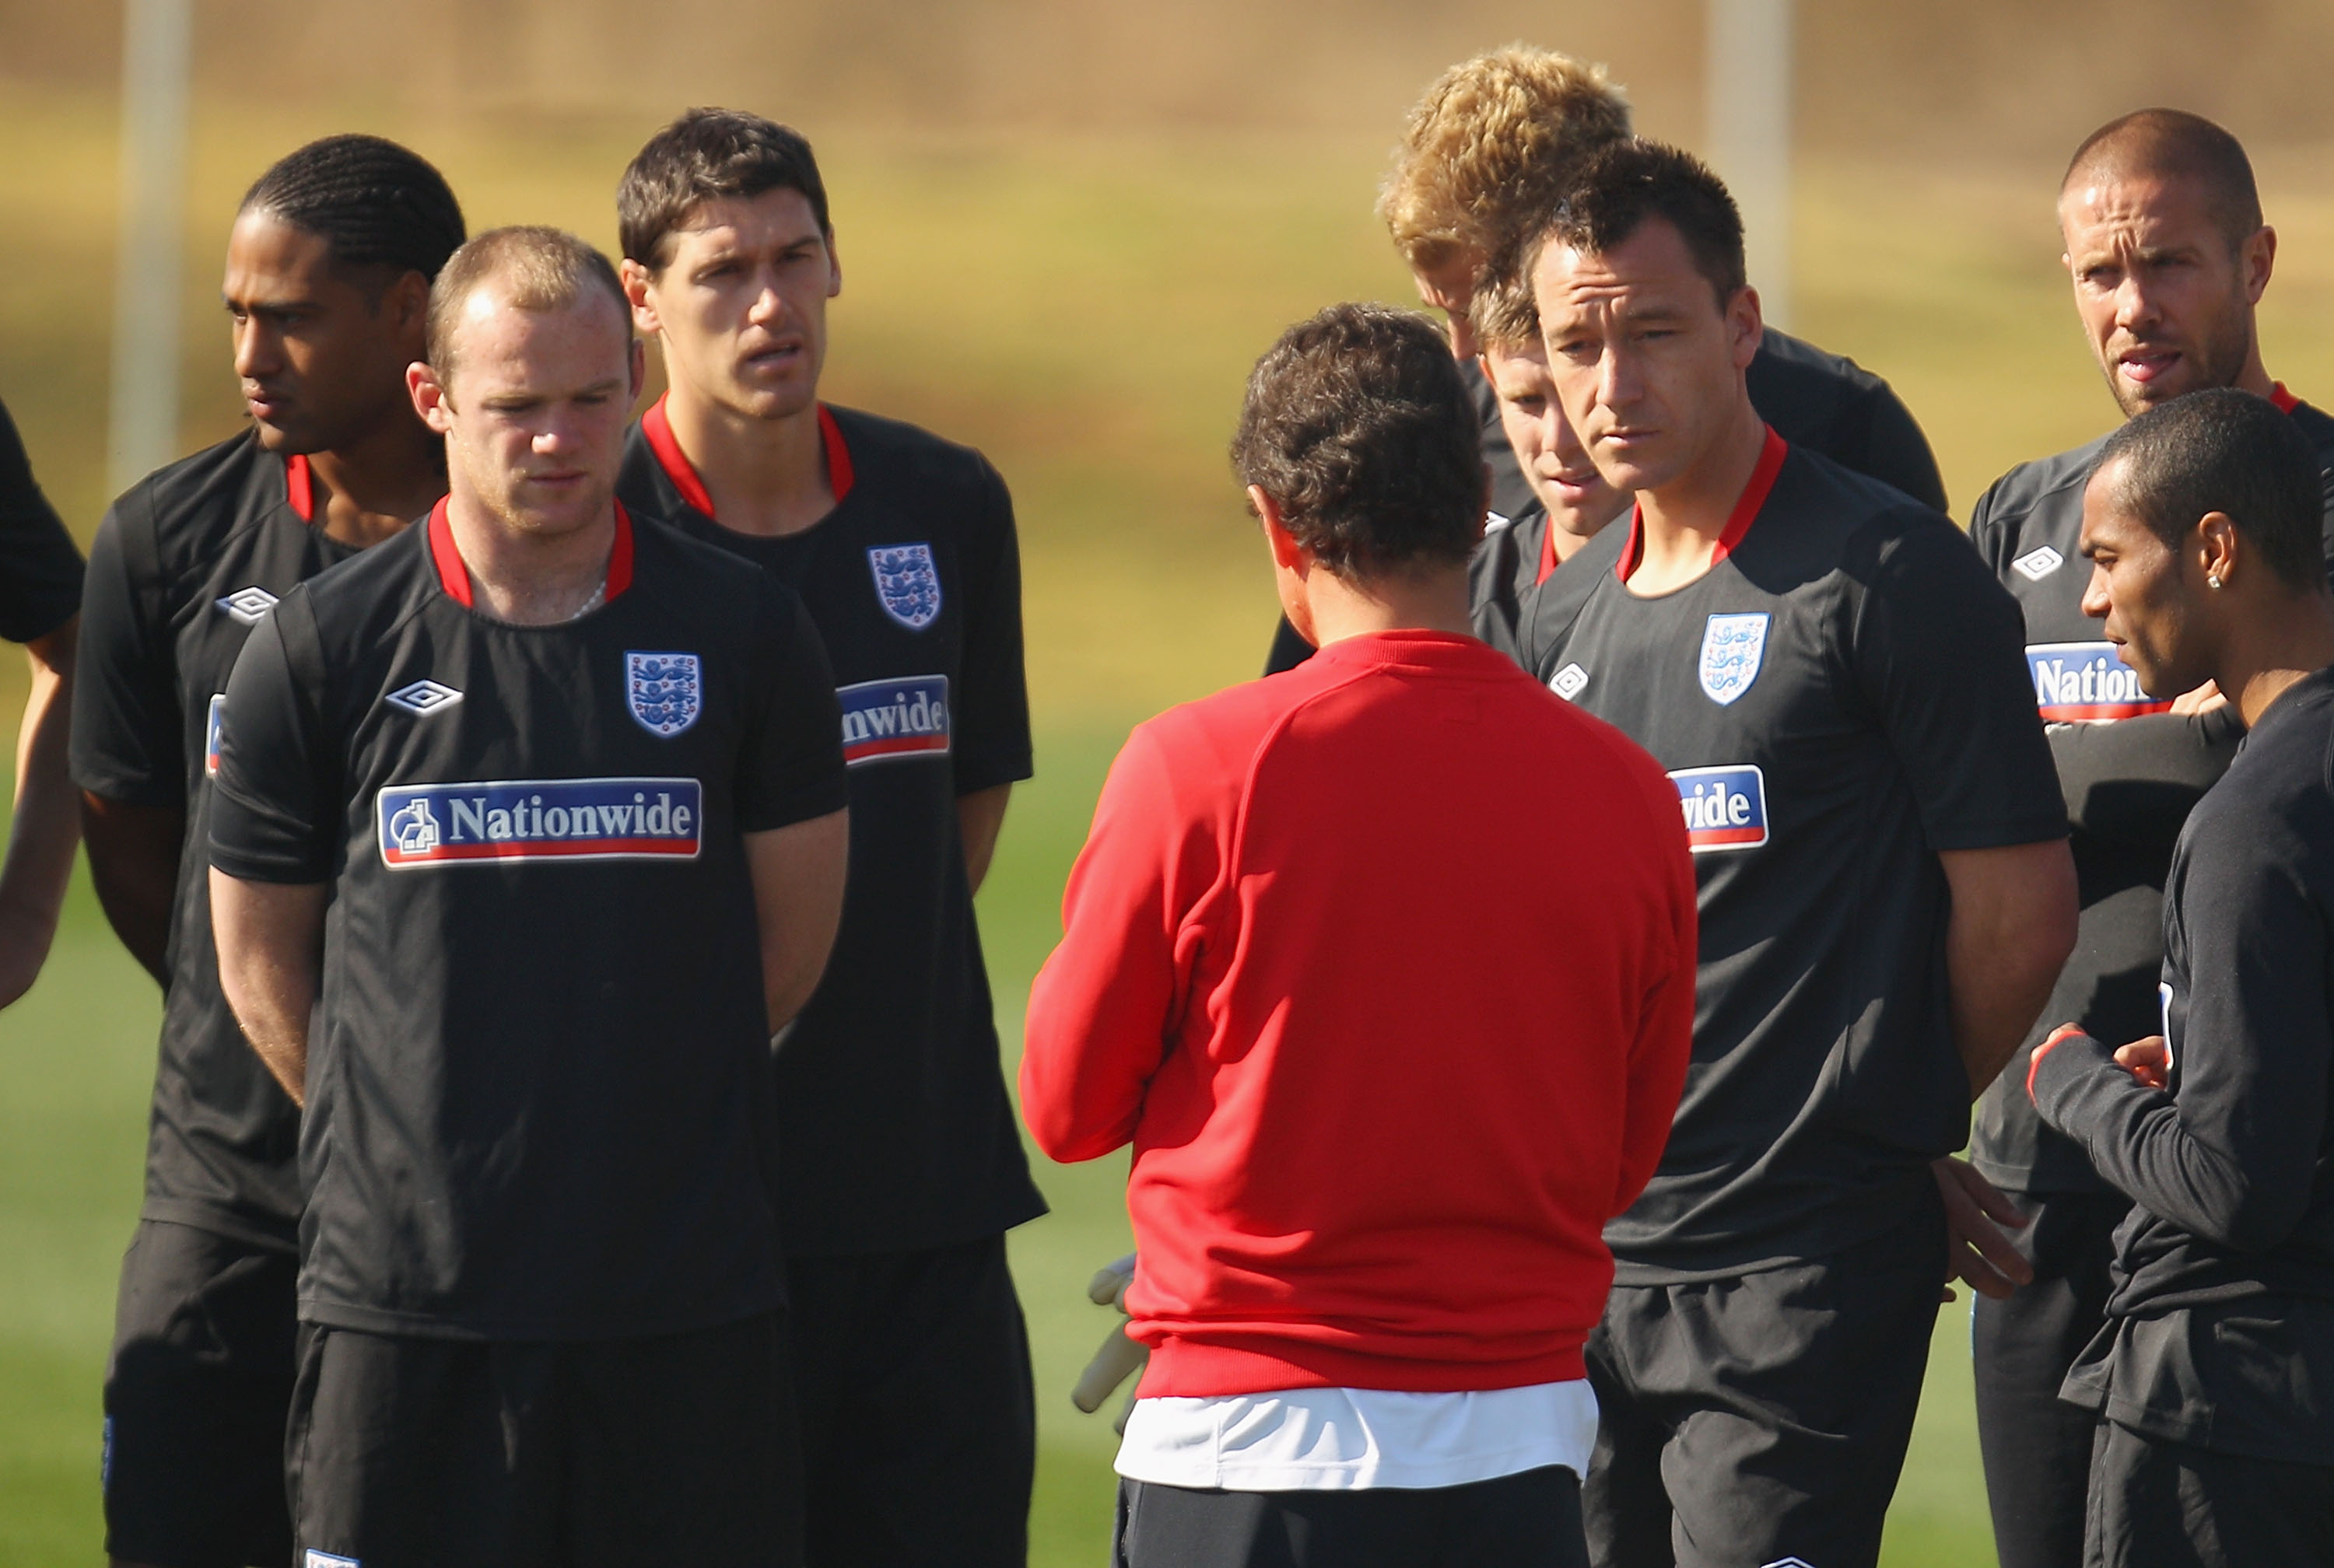 RUSTENBURG, SOUTH AFRICA - JUNE 24:  John Terry looks on as England coach Fabio Capello speaks to his team at an England training session during the FIFA 2010 World Cup at the Royal Bafokeng Sports Campus on June 24, 2010 in Rustenburg, South Africa.  (Ph